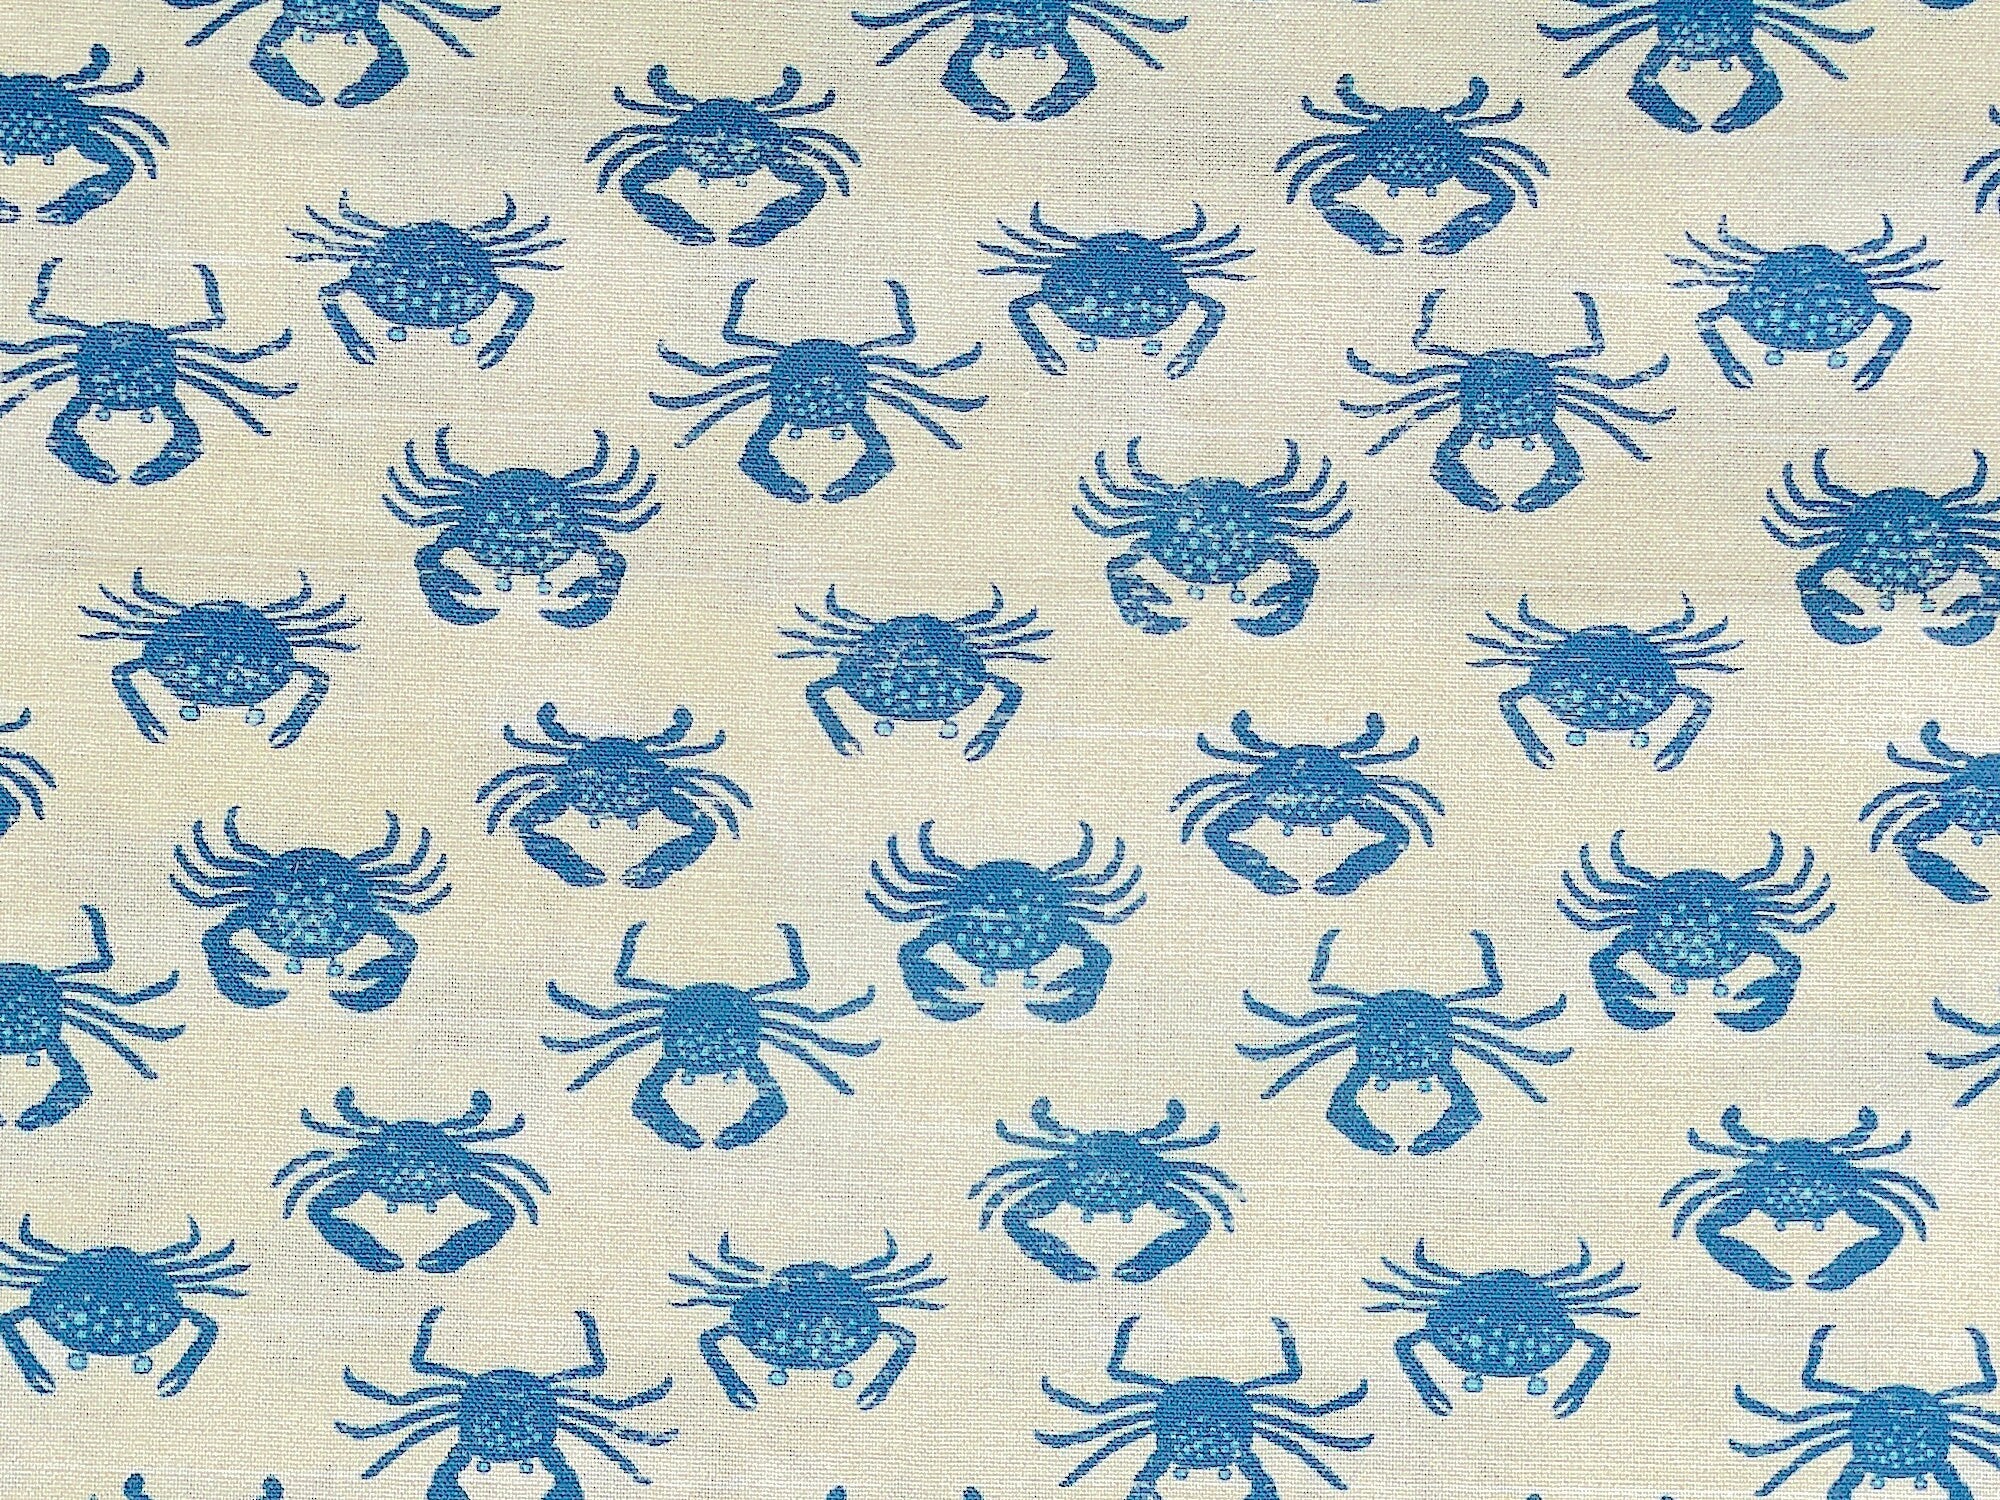 Close up of blue crabs on an ivory background.